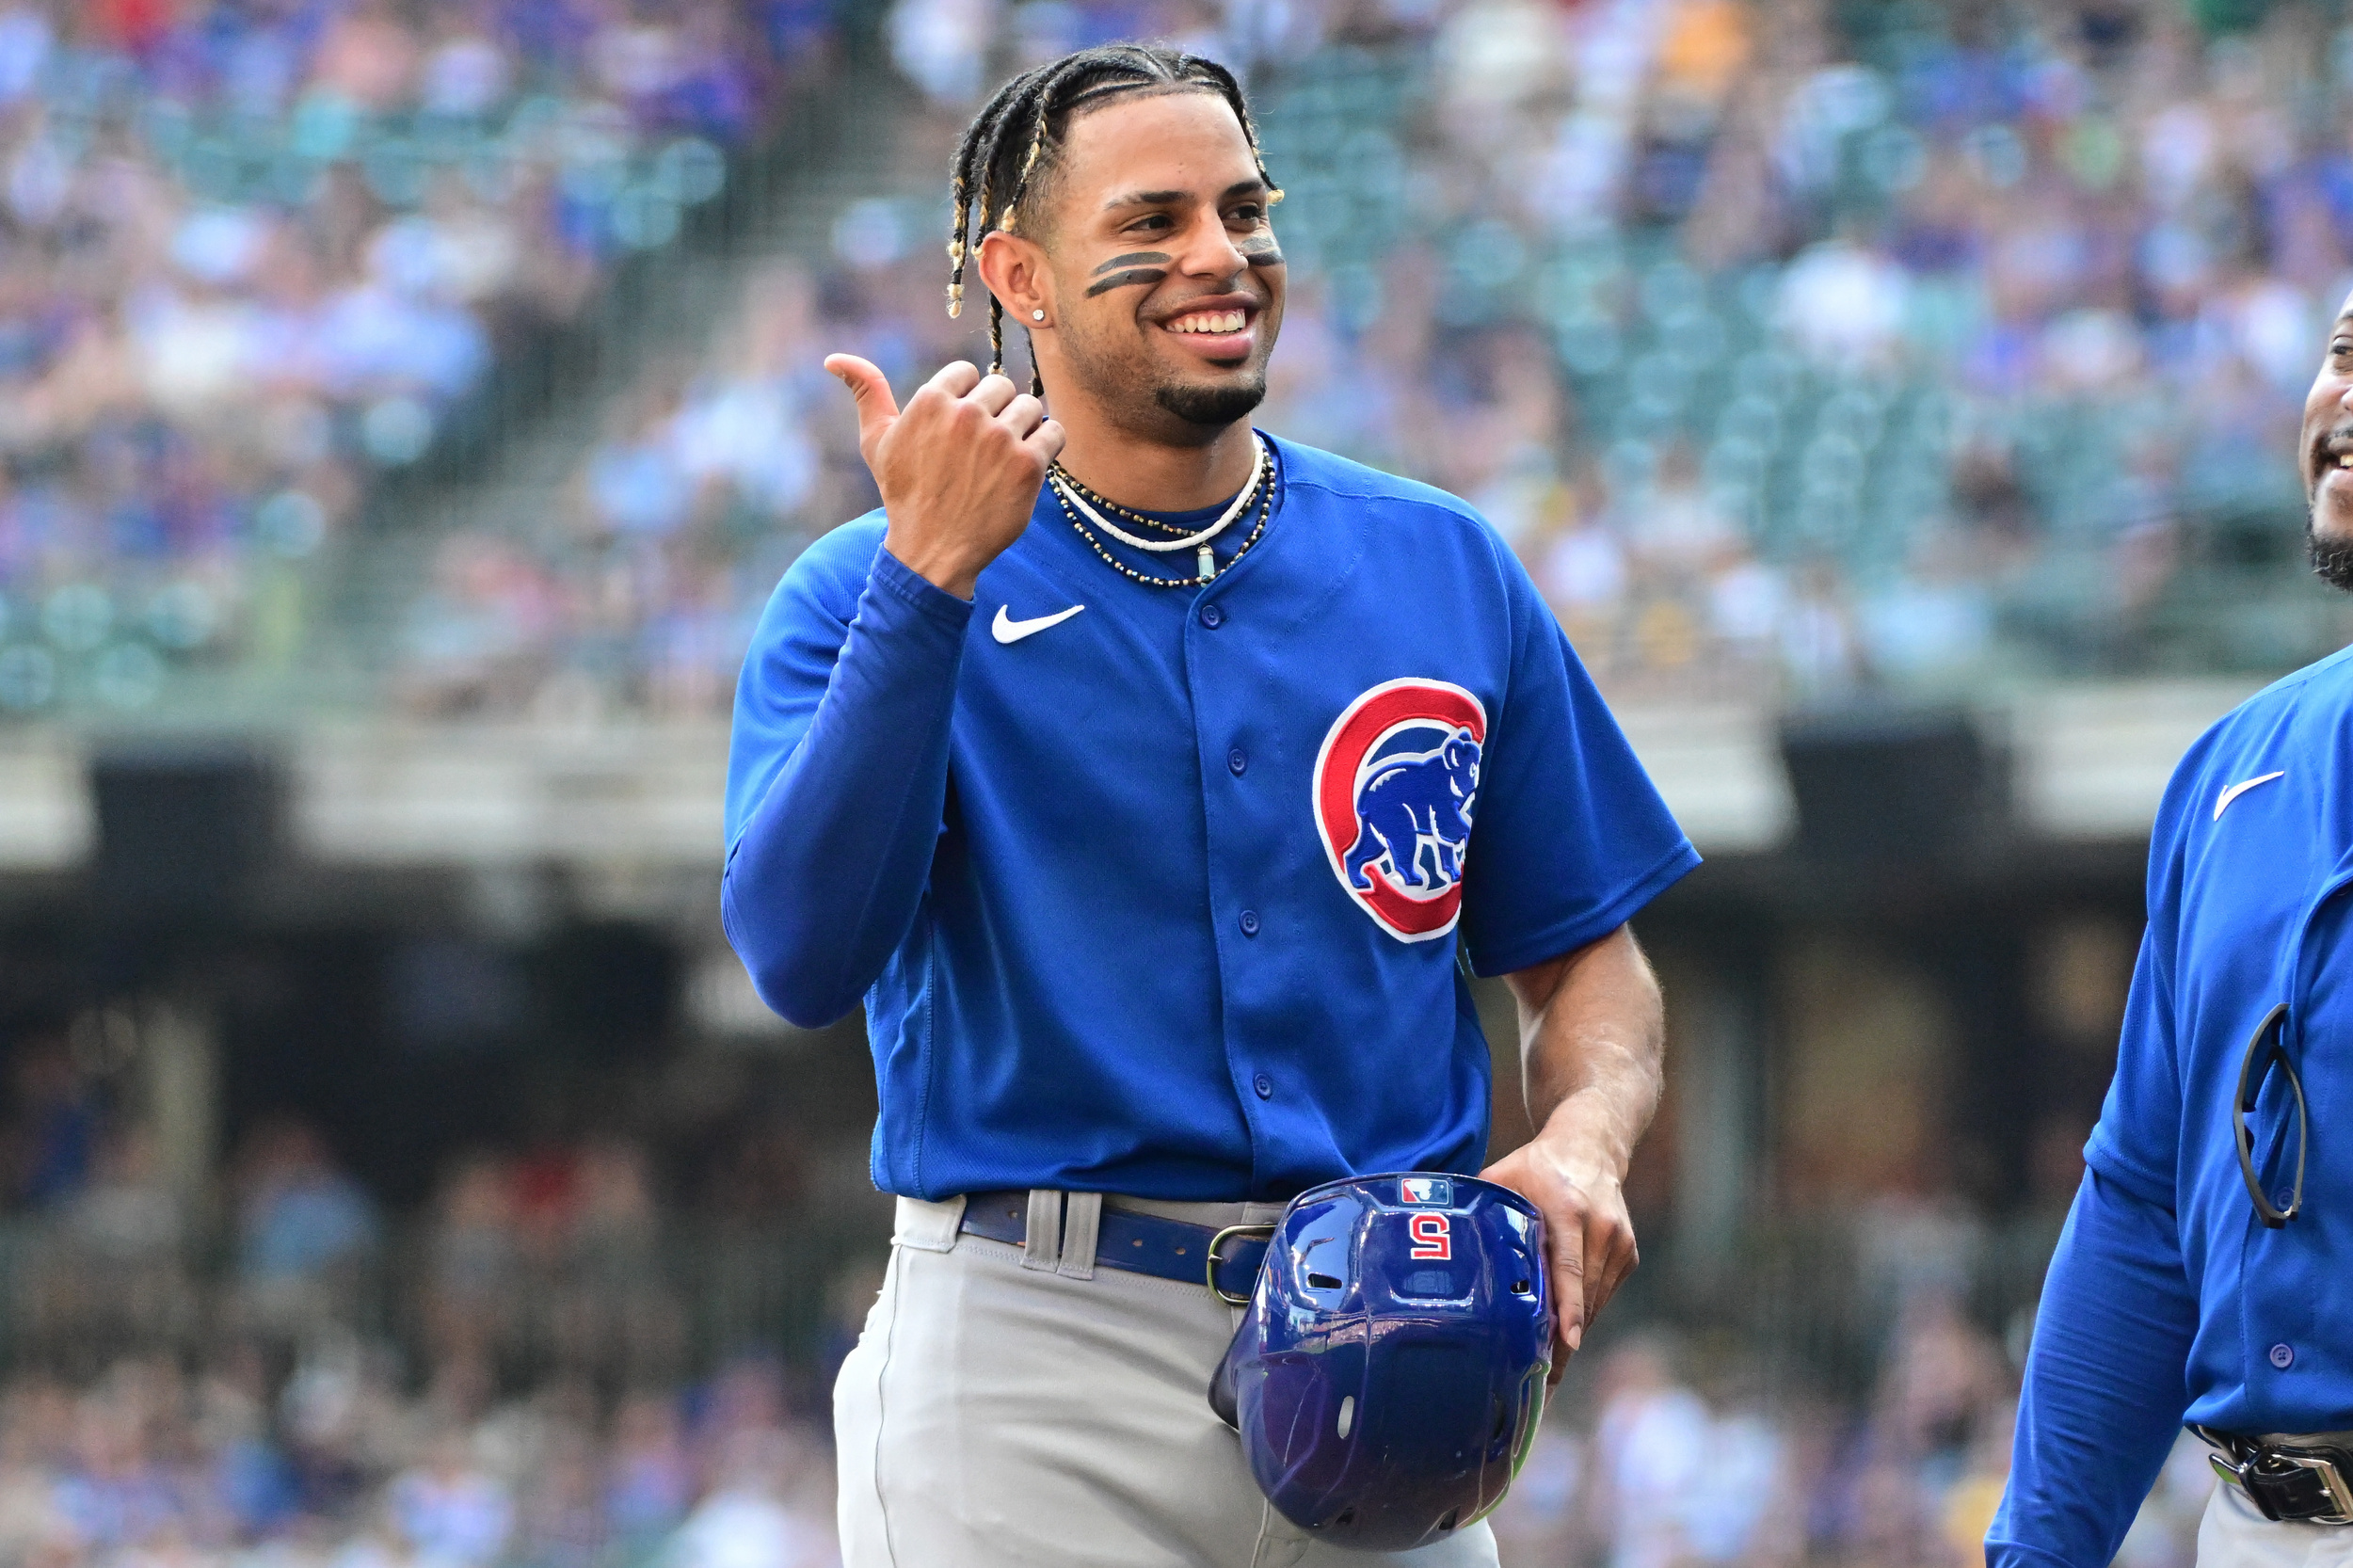 cubs brass downplays possibility that they will trade slugger